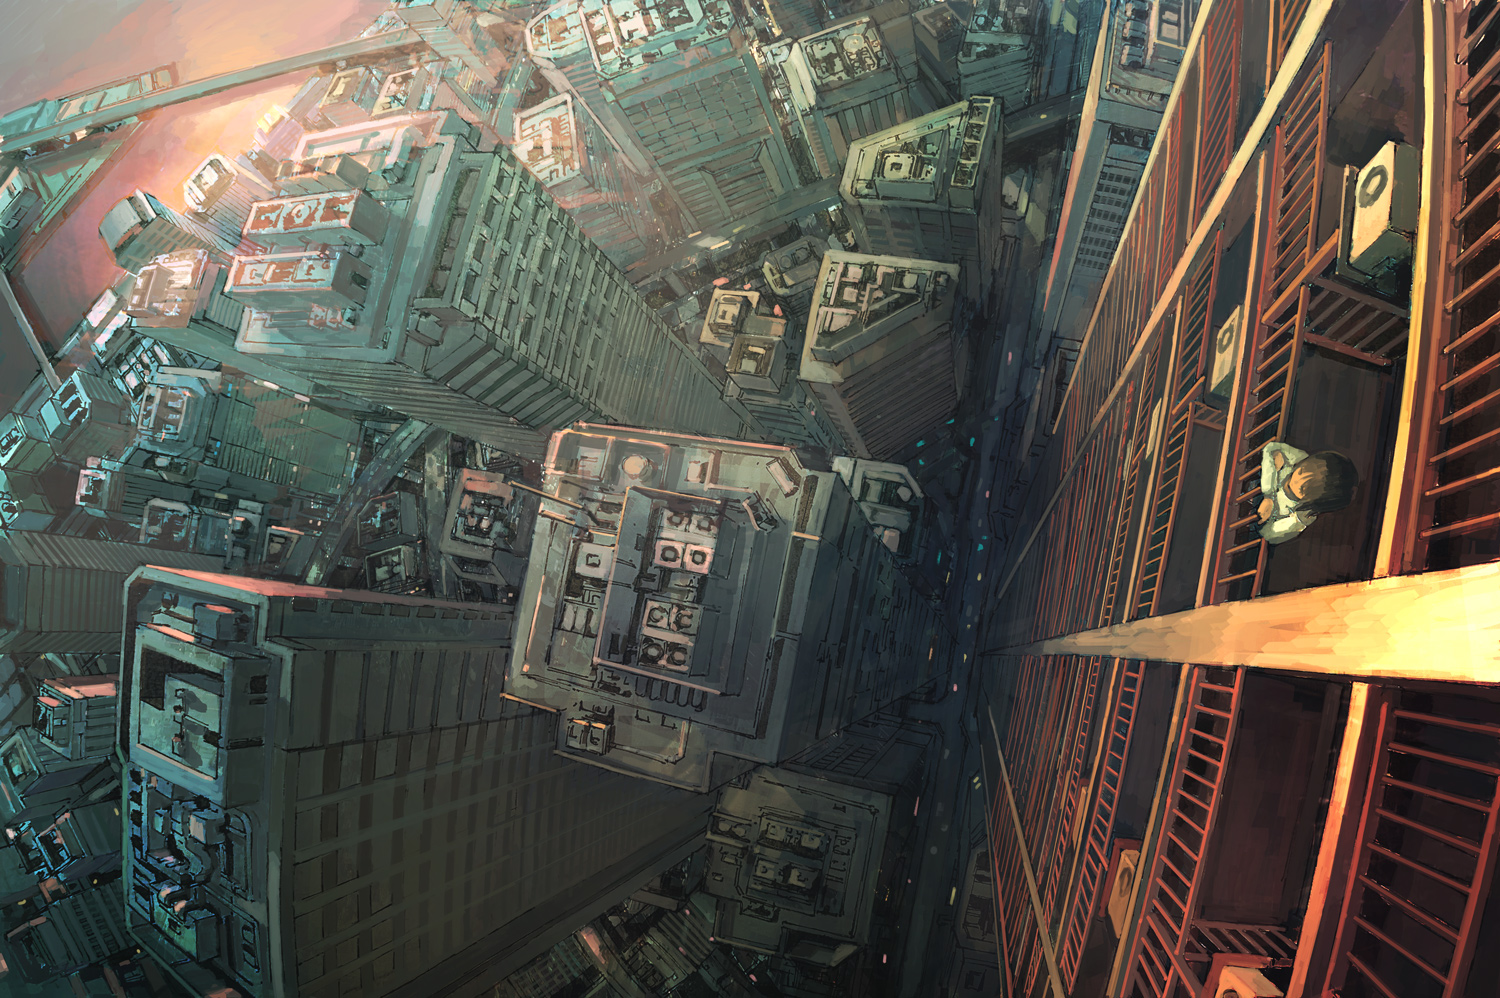 General 1500x998 digital art illustration aerial view heights building city urban concept art rooftops balcony